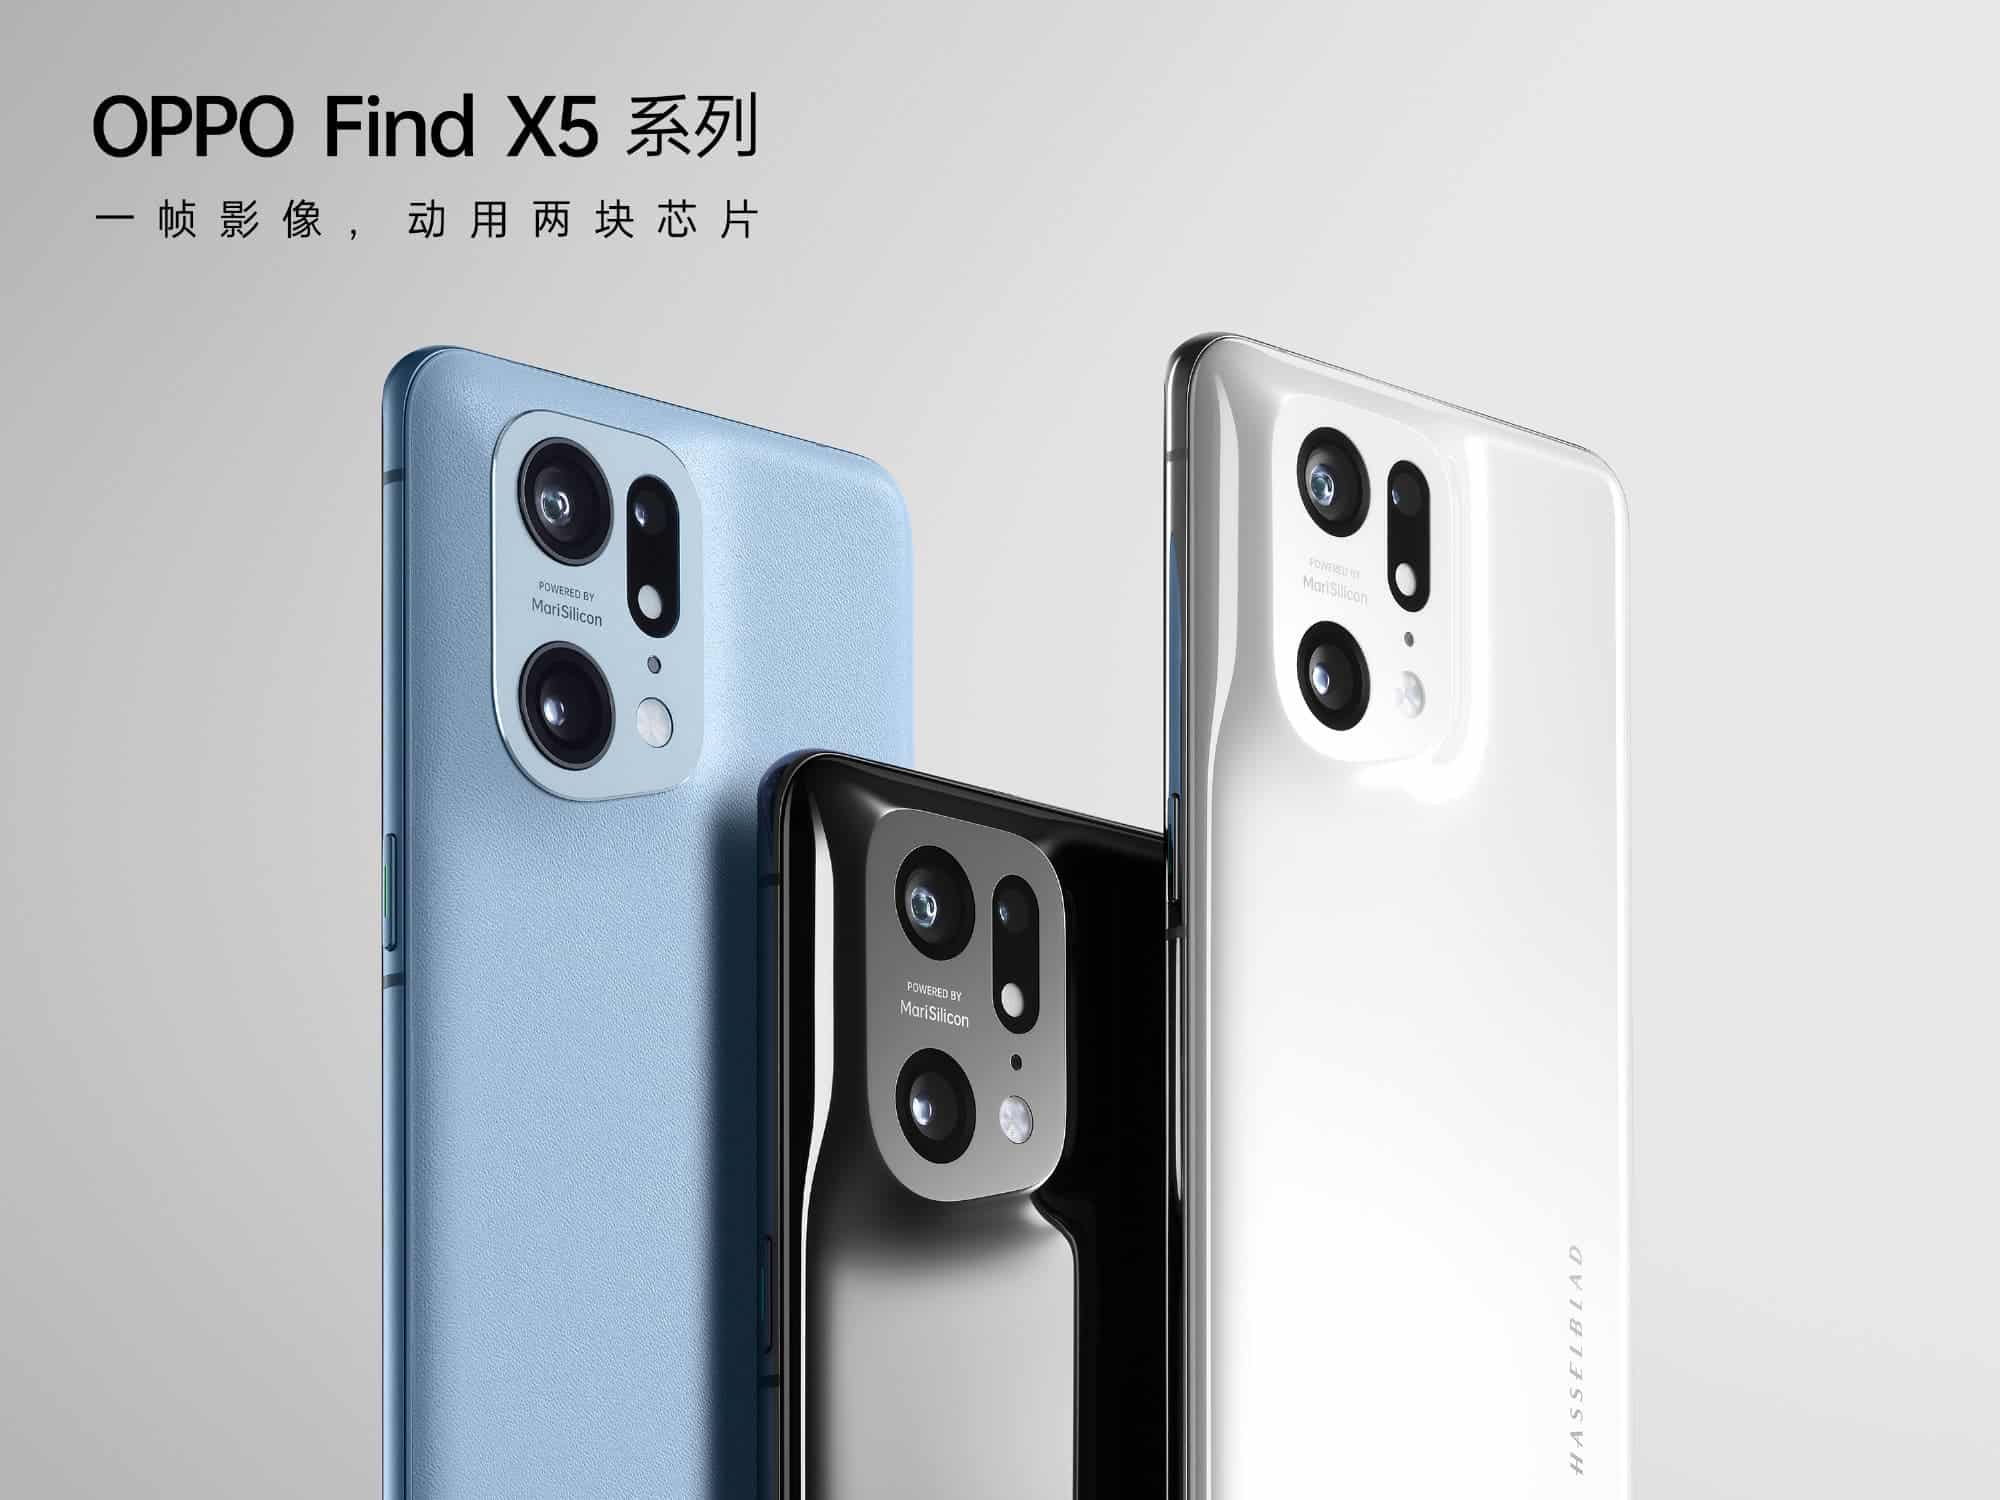 Oppo Find X5 Pro price revealed: Too expensive - Gizchina.com